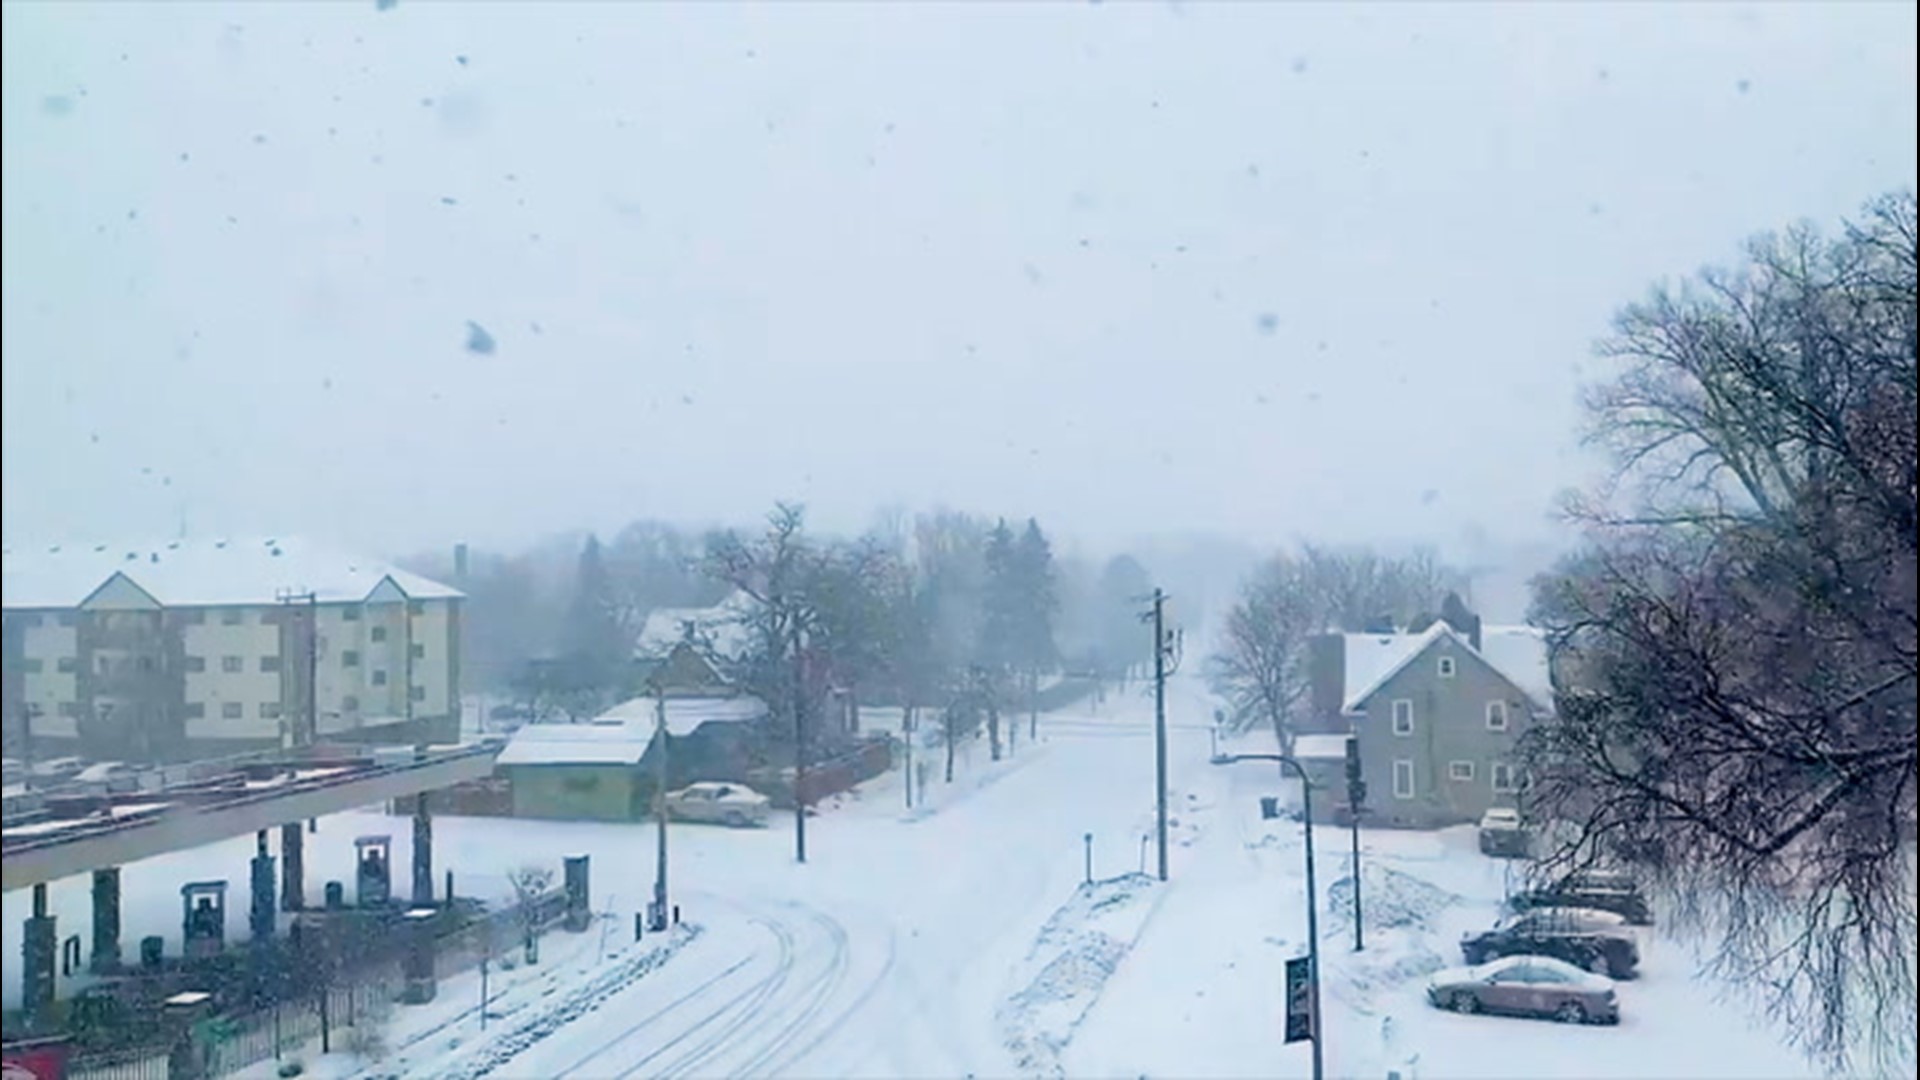 In St. Cloud, Foreston, and Victoria, Minnesota, heavy snow is falling, causing low visibility on Feb. 17.